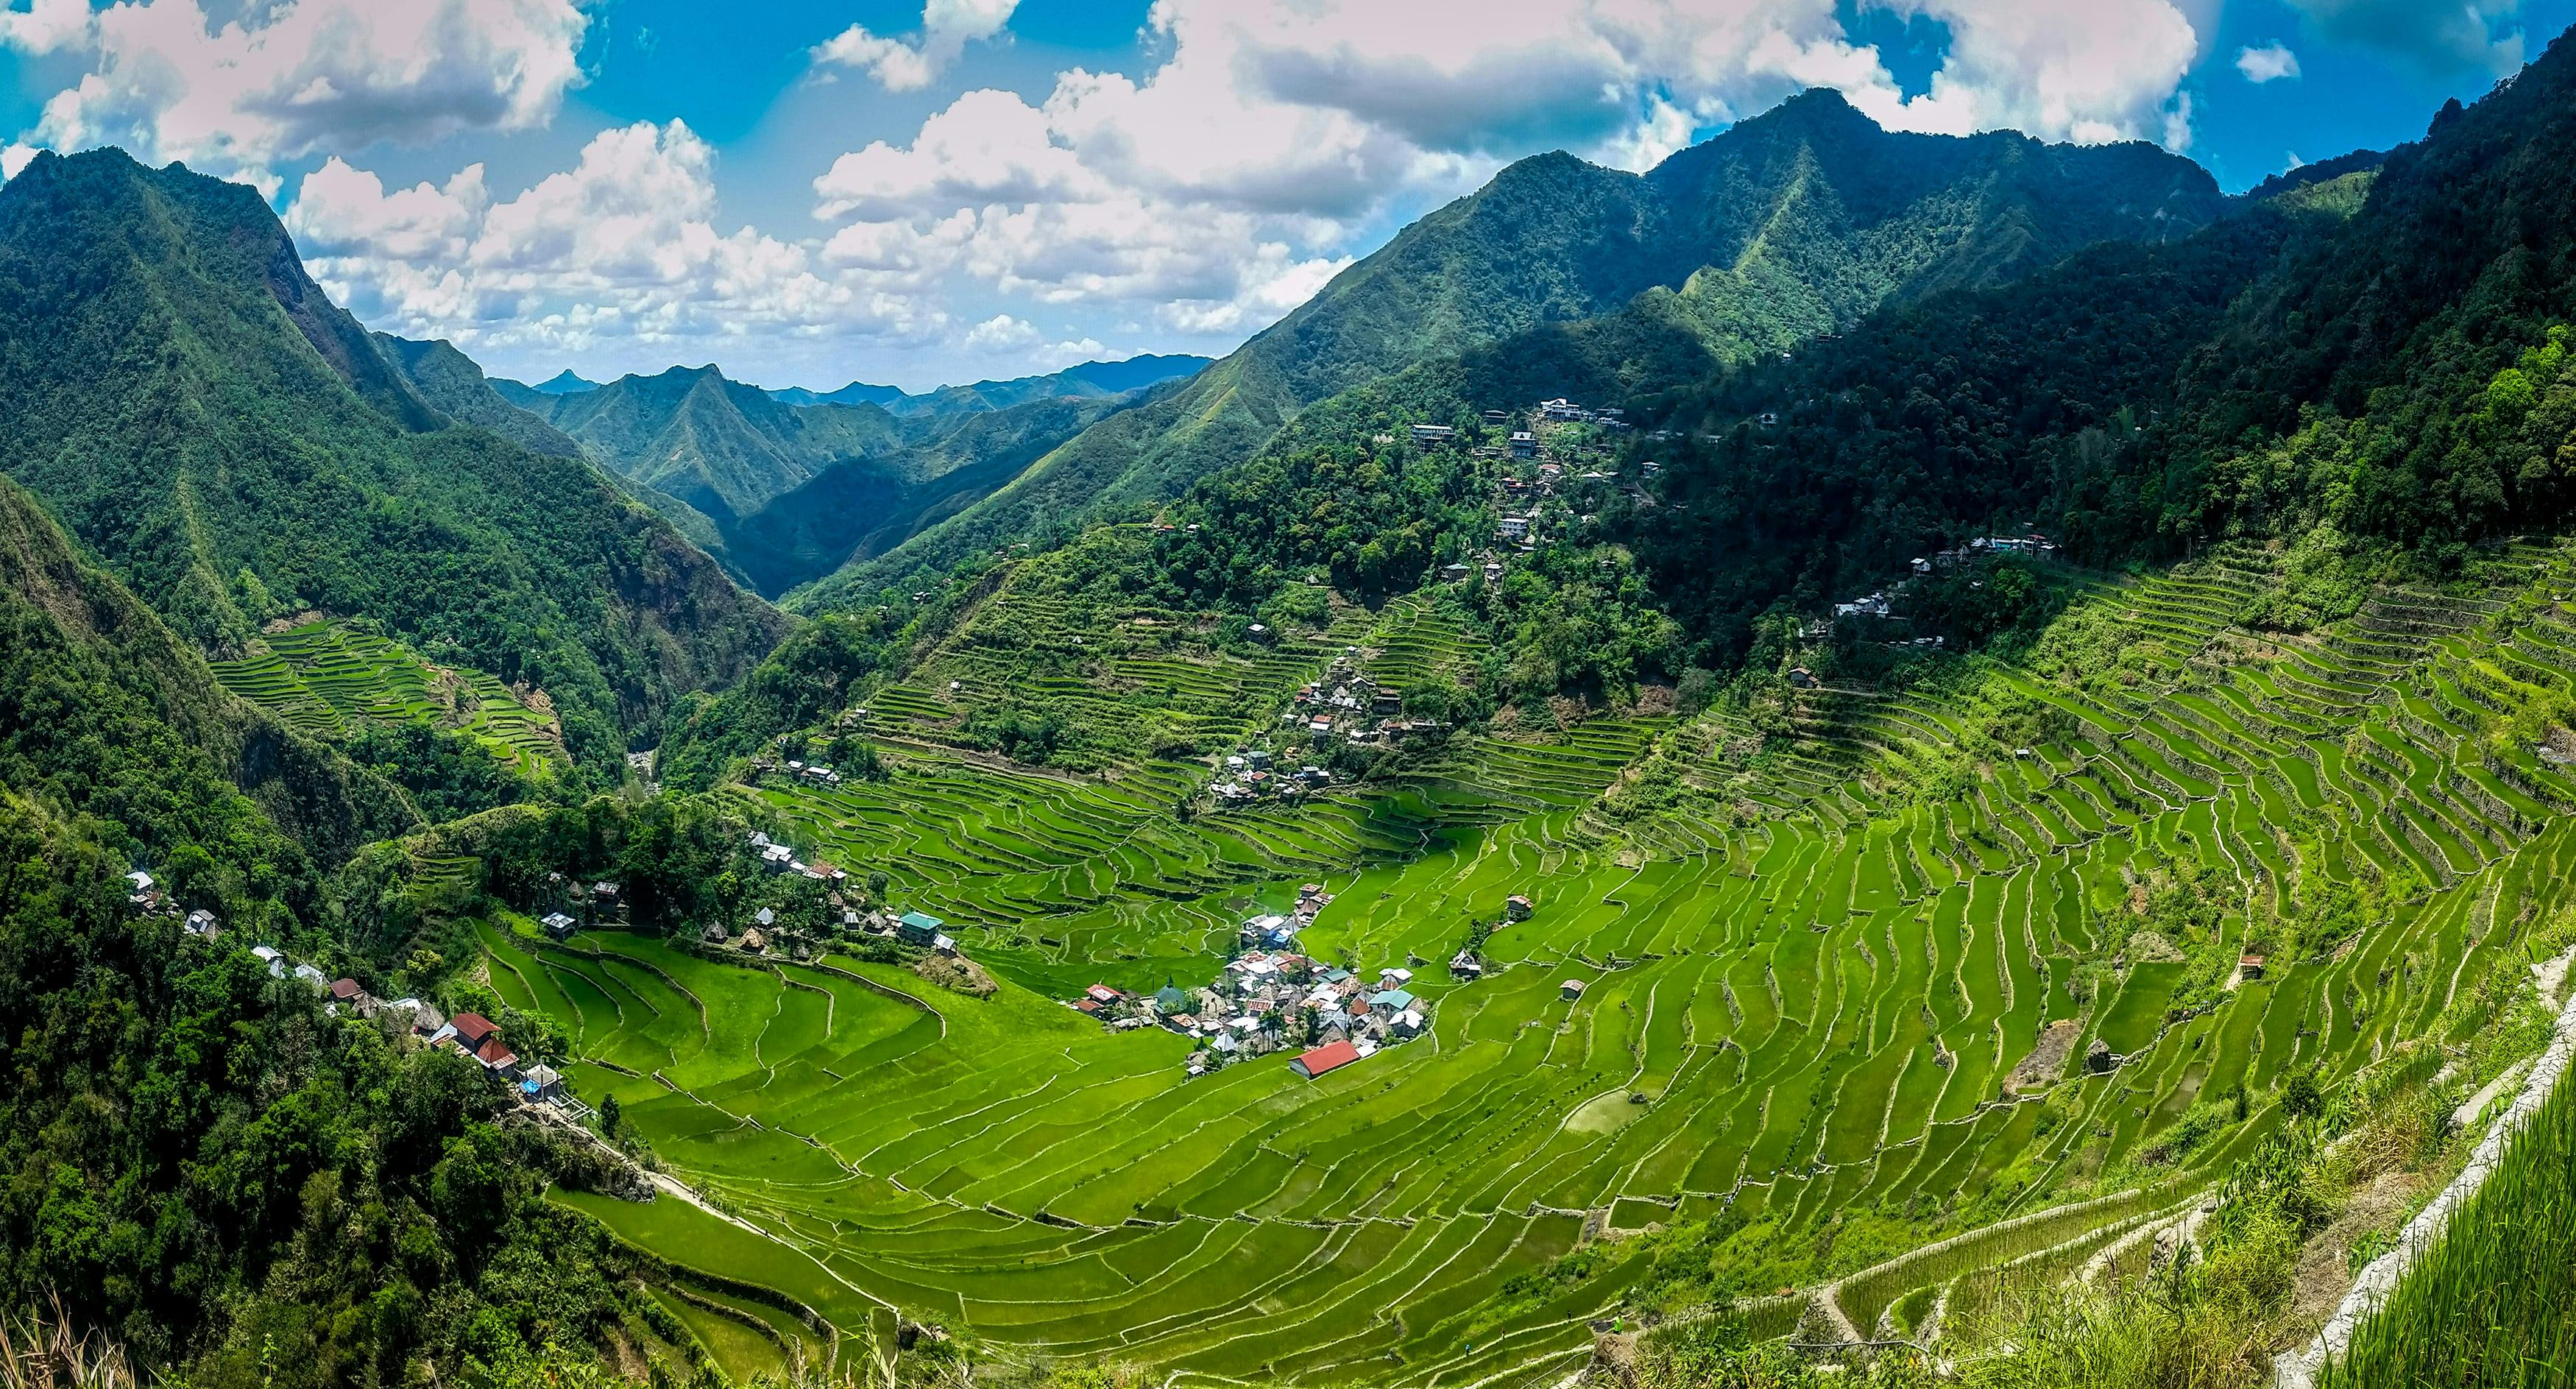 Scenic view of Batad Rices Terraces in Banaue